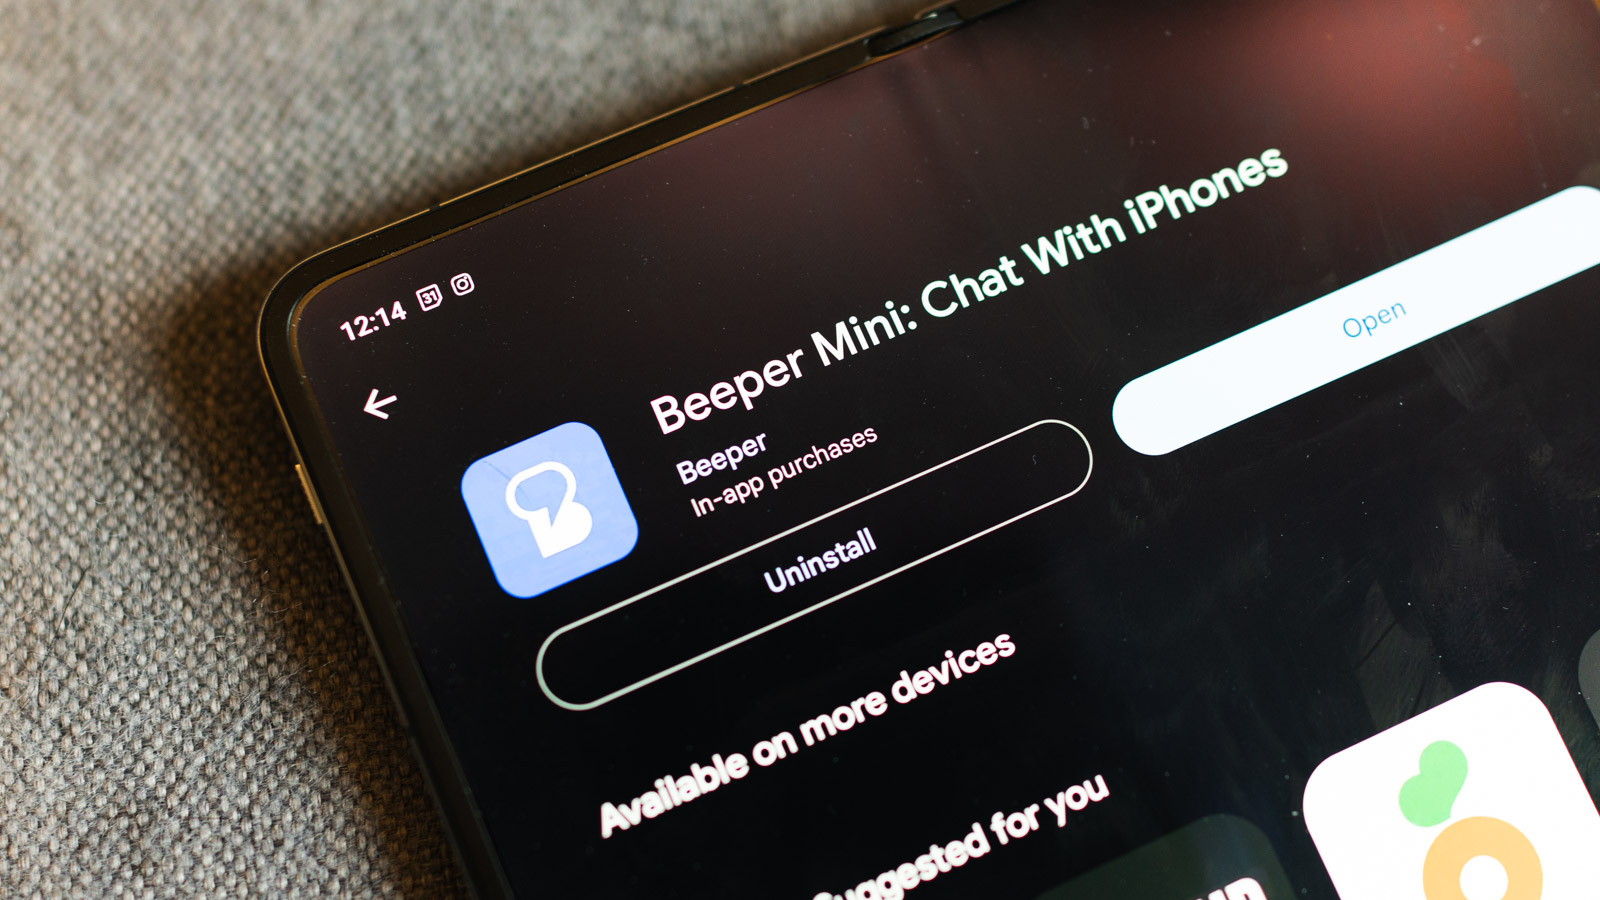 With iMessage thanks to Beeper Mini, the OnePlus Open is my new favorite phone